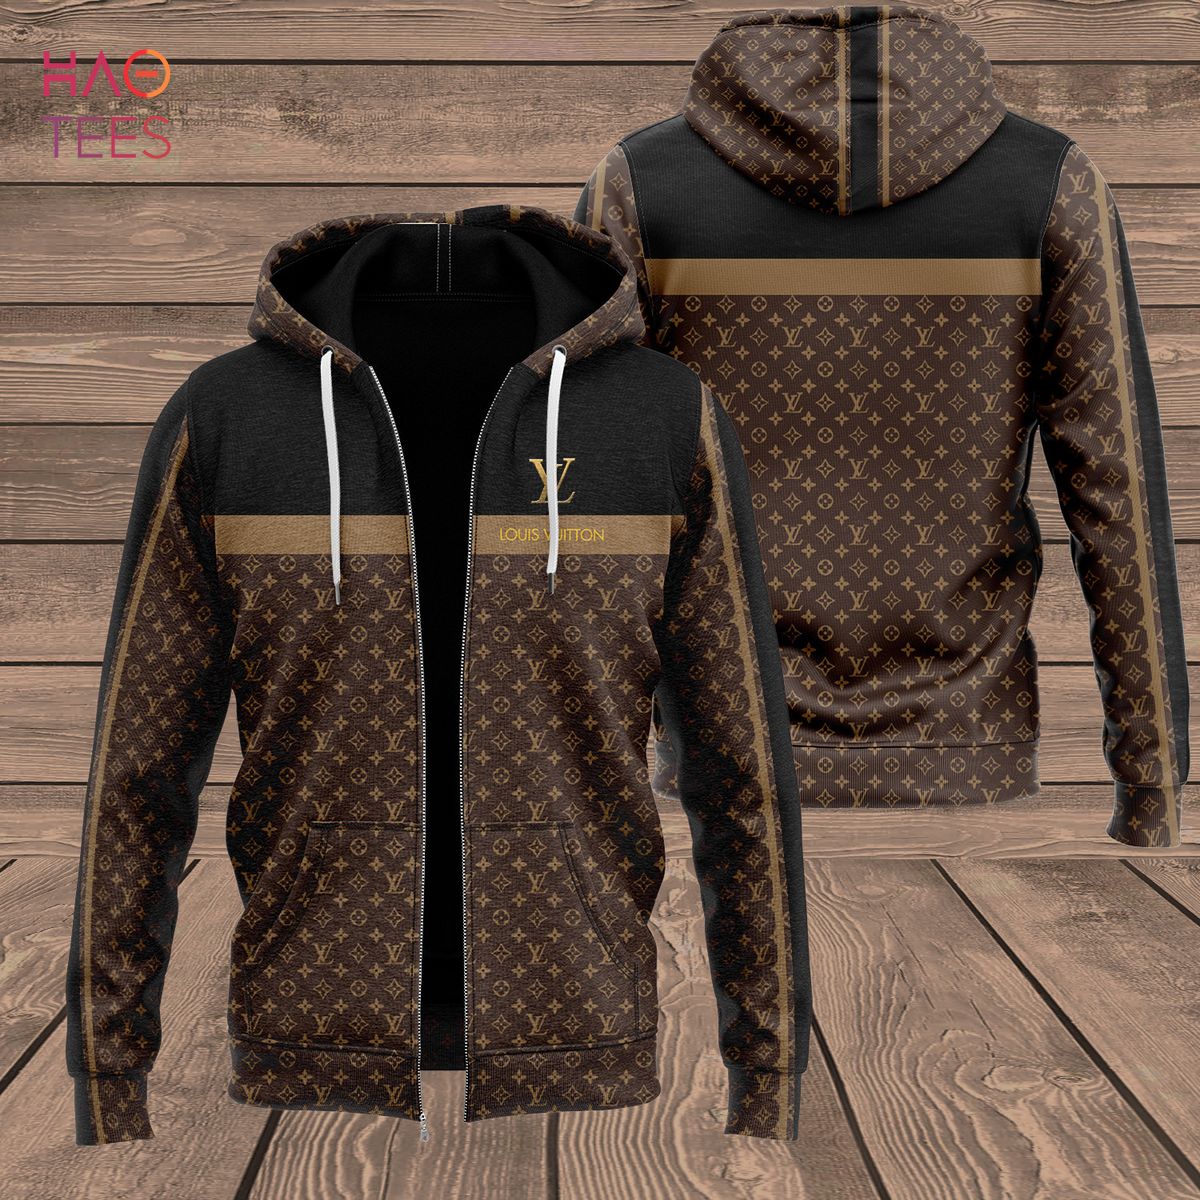 Luxury Louis Vuitton Dark Brown with Gold Diagonal Lines 3D Shirt and Pants